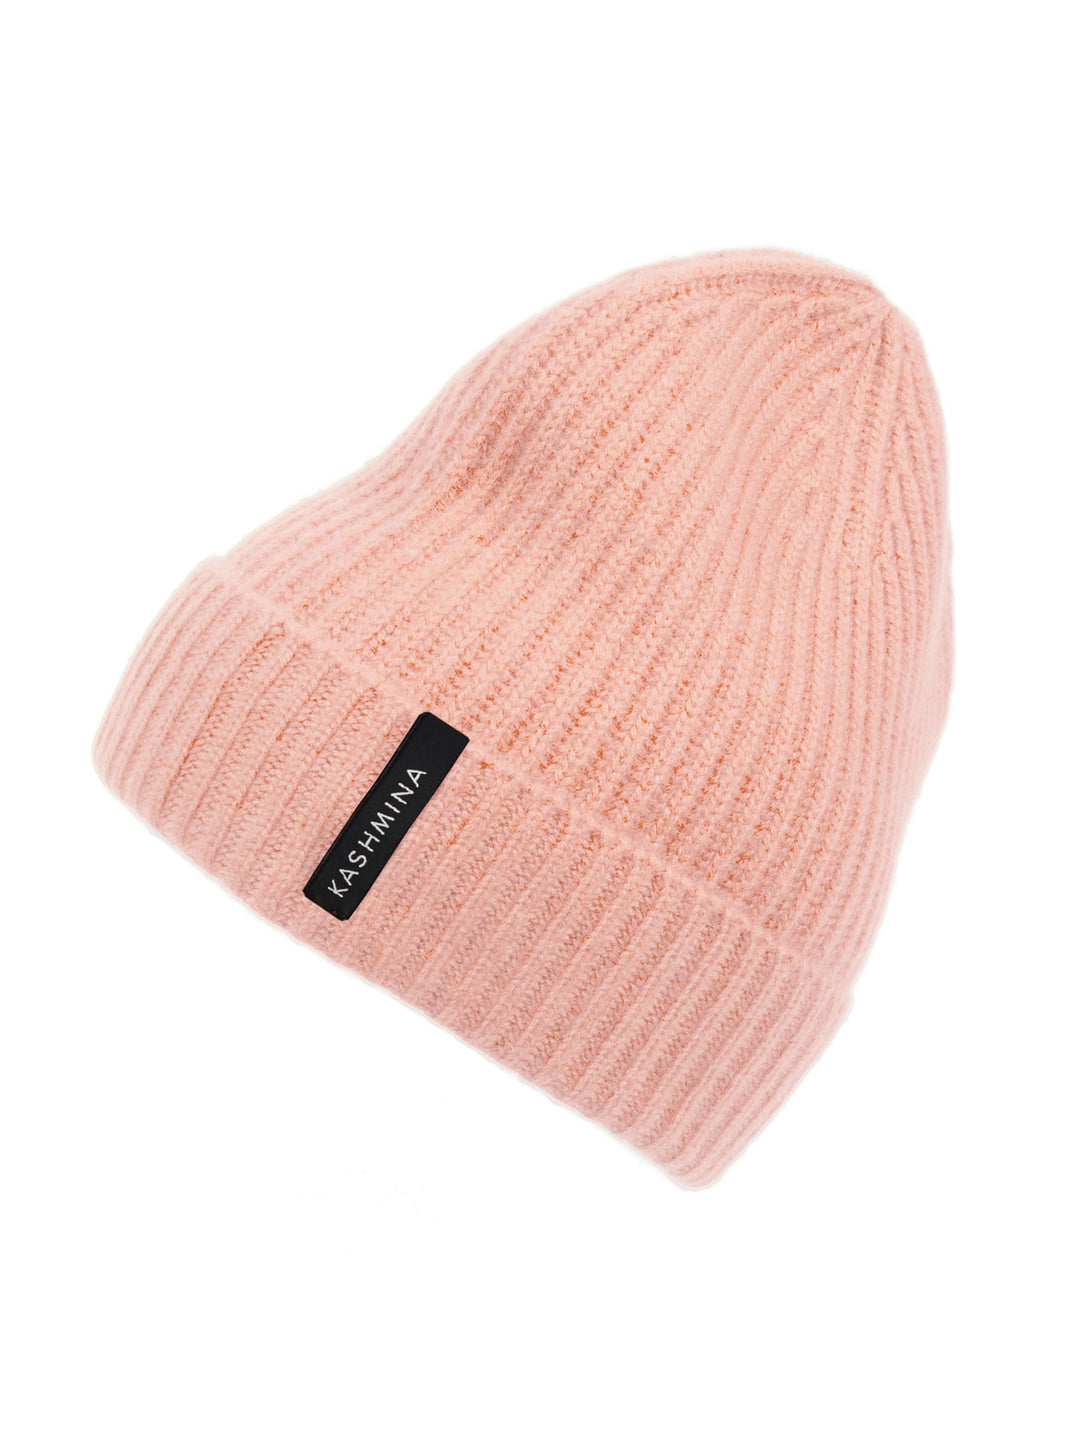 Cashmere cap "Elli", 100% pure cashmere, color: Peachy Pink, knitted, non itching, soft, beanie, cap, Scandinavian design by Kashmina